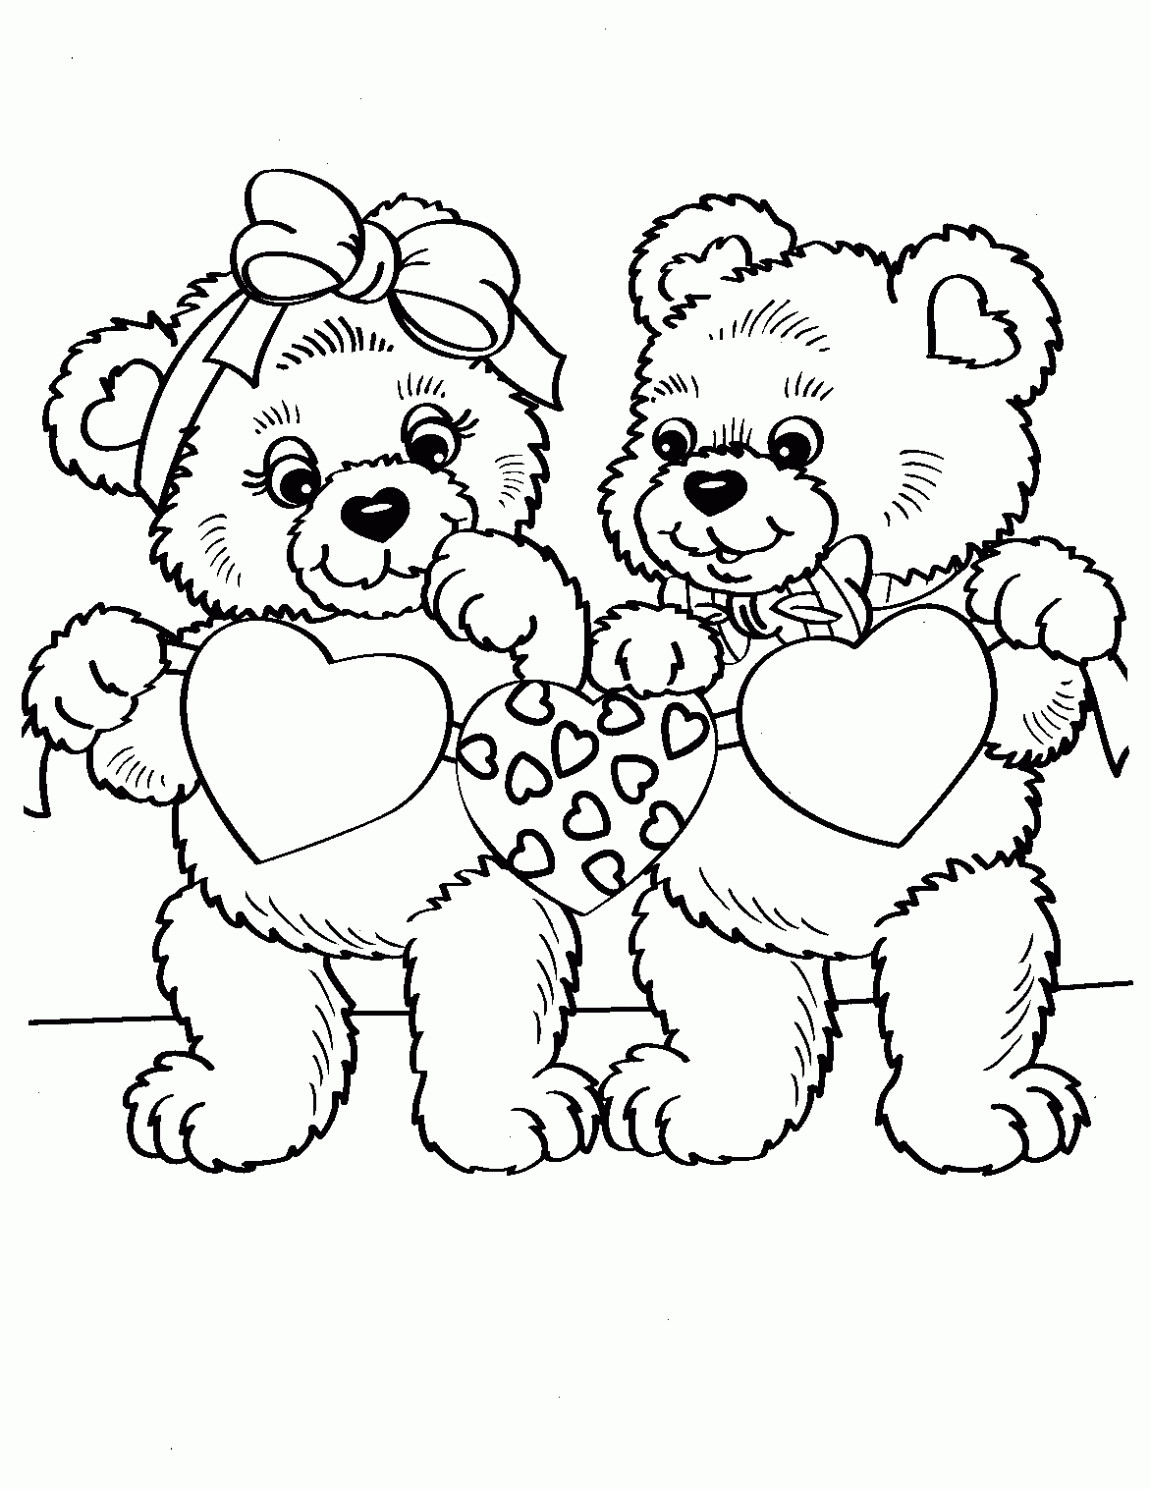 Valentine Coloring Page Couple Teddy Bear Valentine Coloring Pages For Kids On Valentine